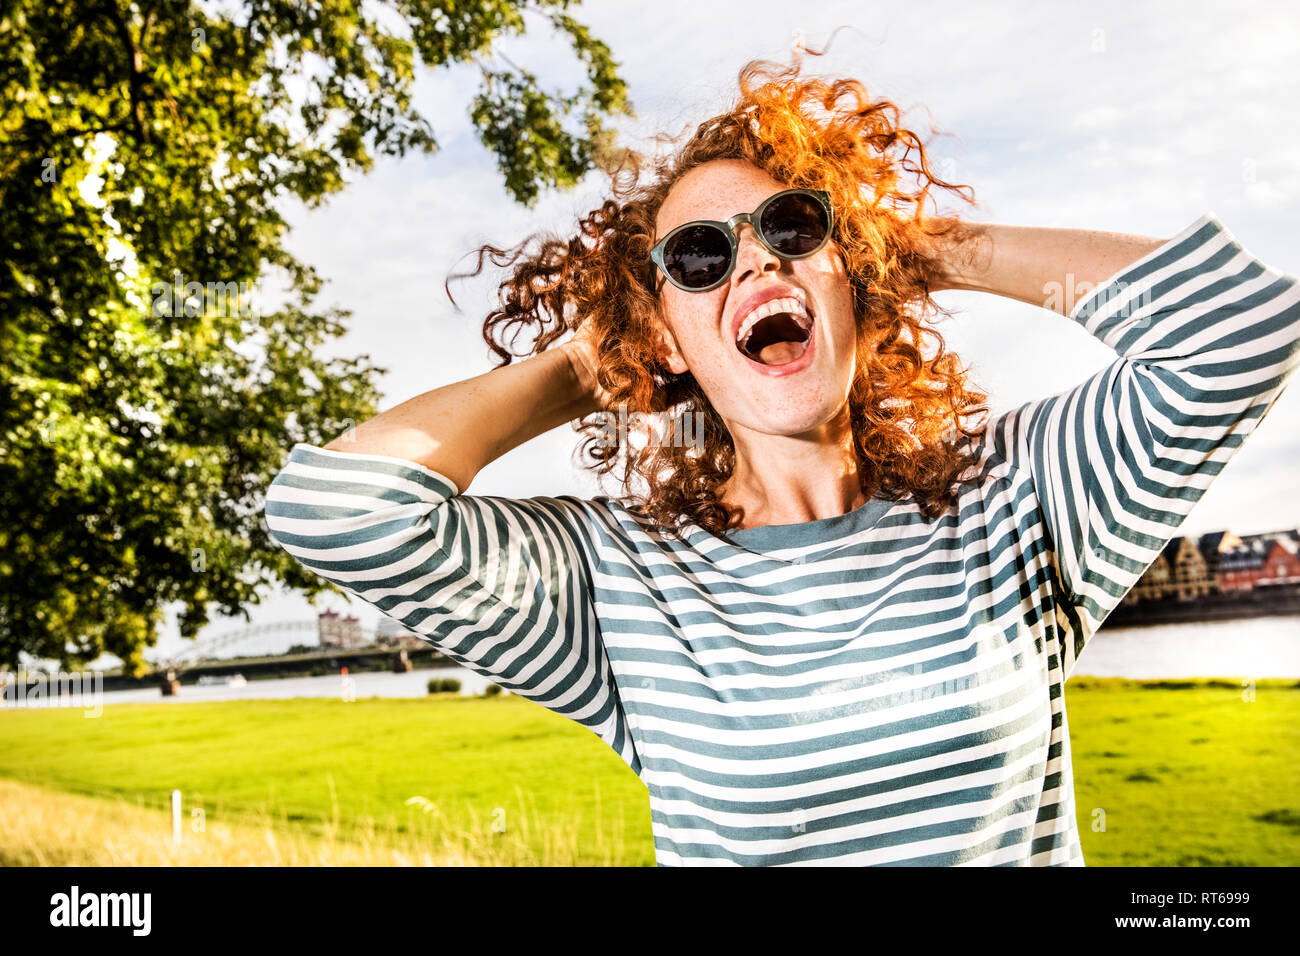 Germany, Cologne, portrait of screaming redheaded young woman wearing sunglasses Stock Photo